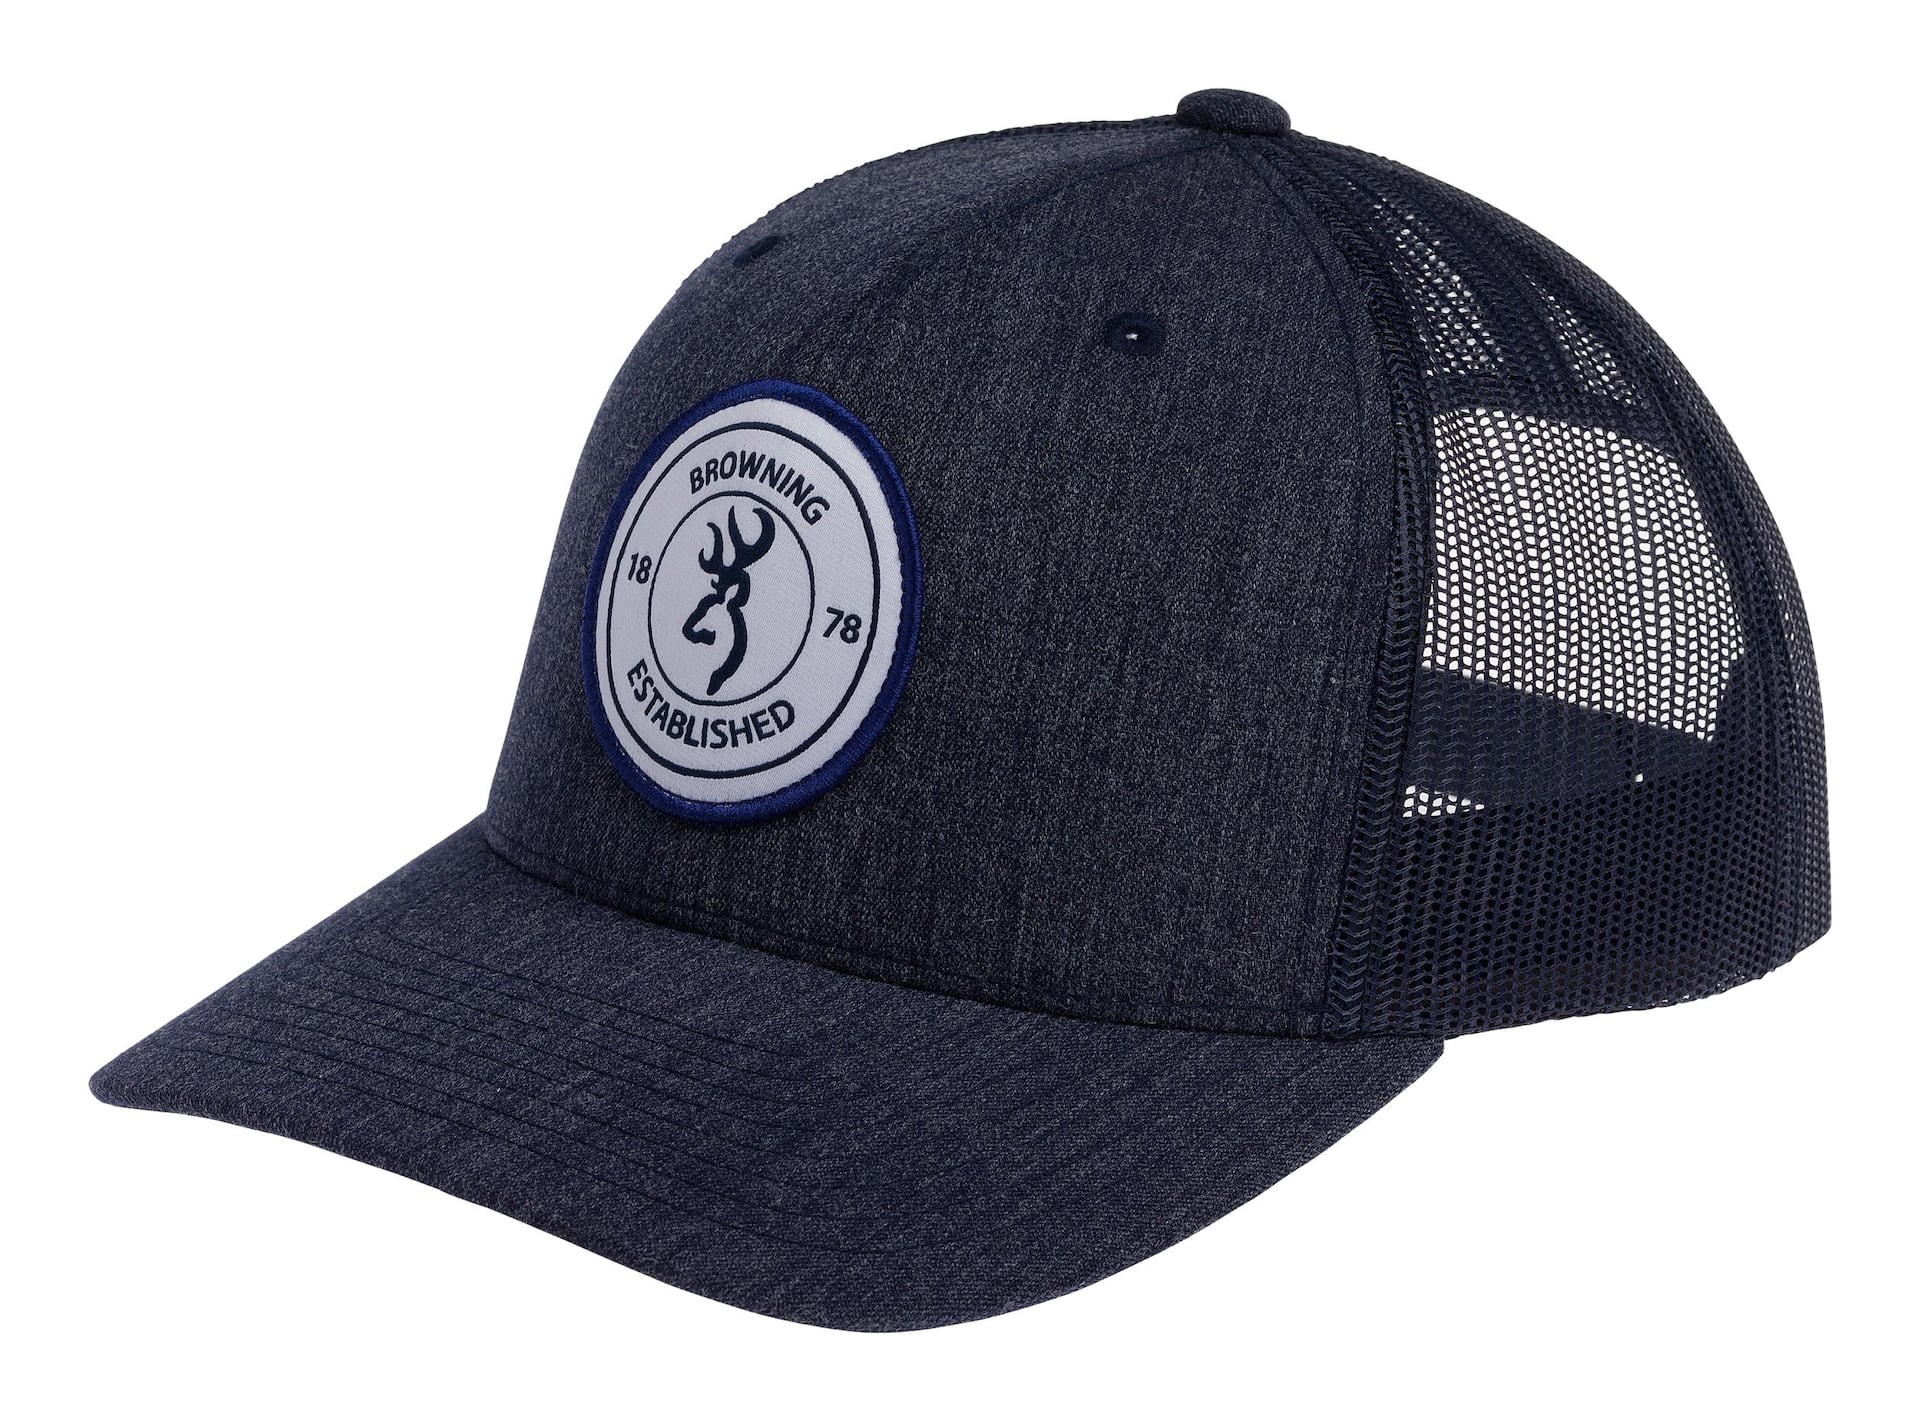 Browning Scout Hunting Mesh Back Baseball CaP with Adjustable Closure, Navy  Blue